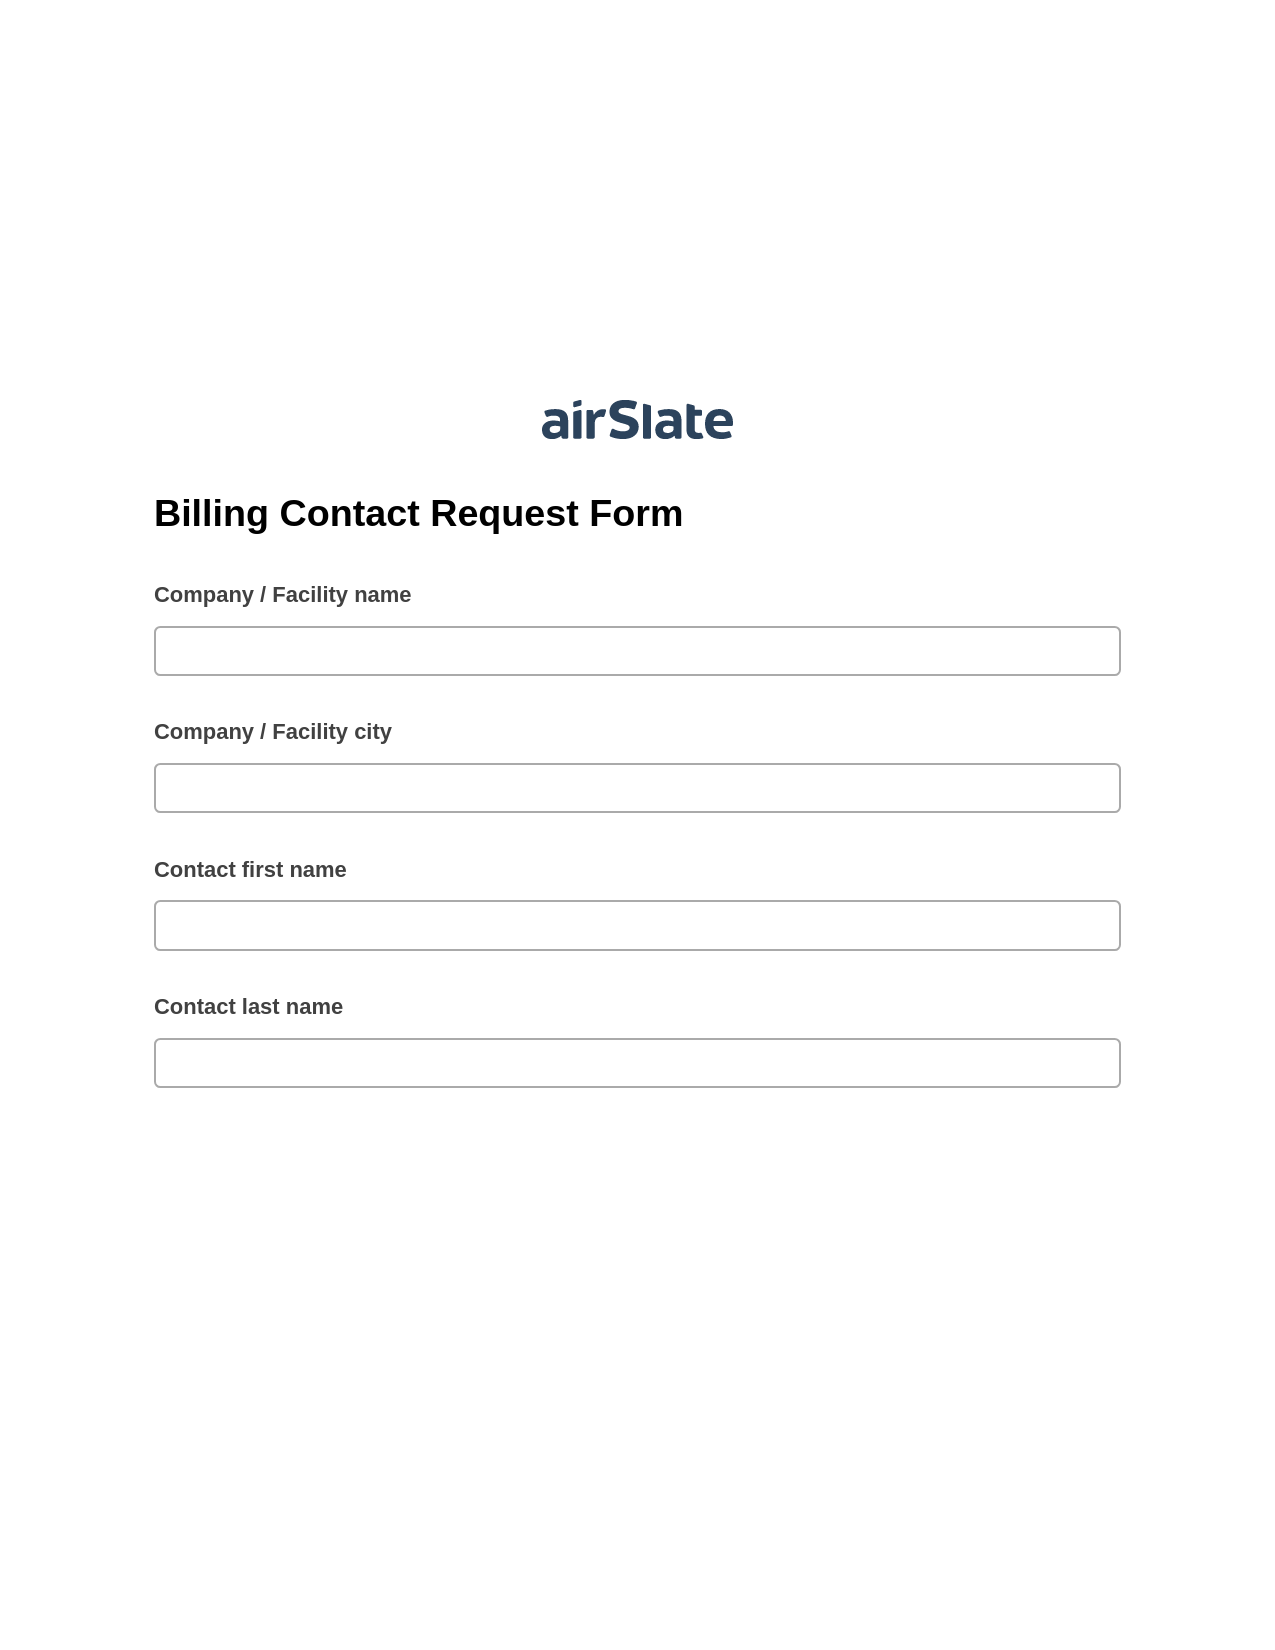 Multirole Billing Contact Request Form Pre-fill from Salesforce Record Bot, Revoke Access Bot, OneDrive Bot